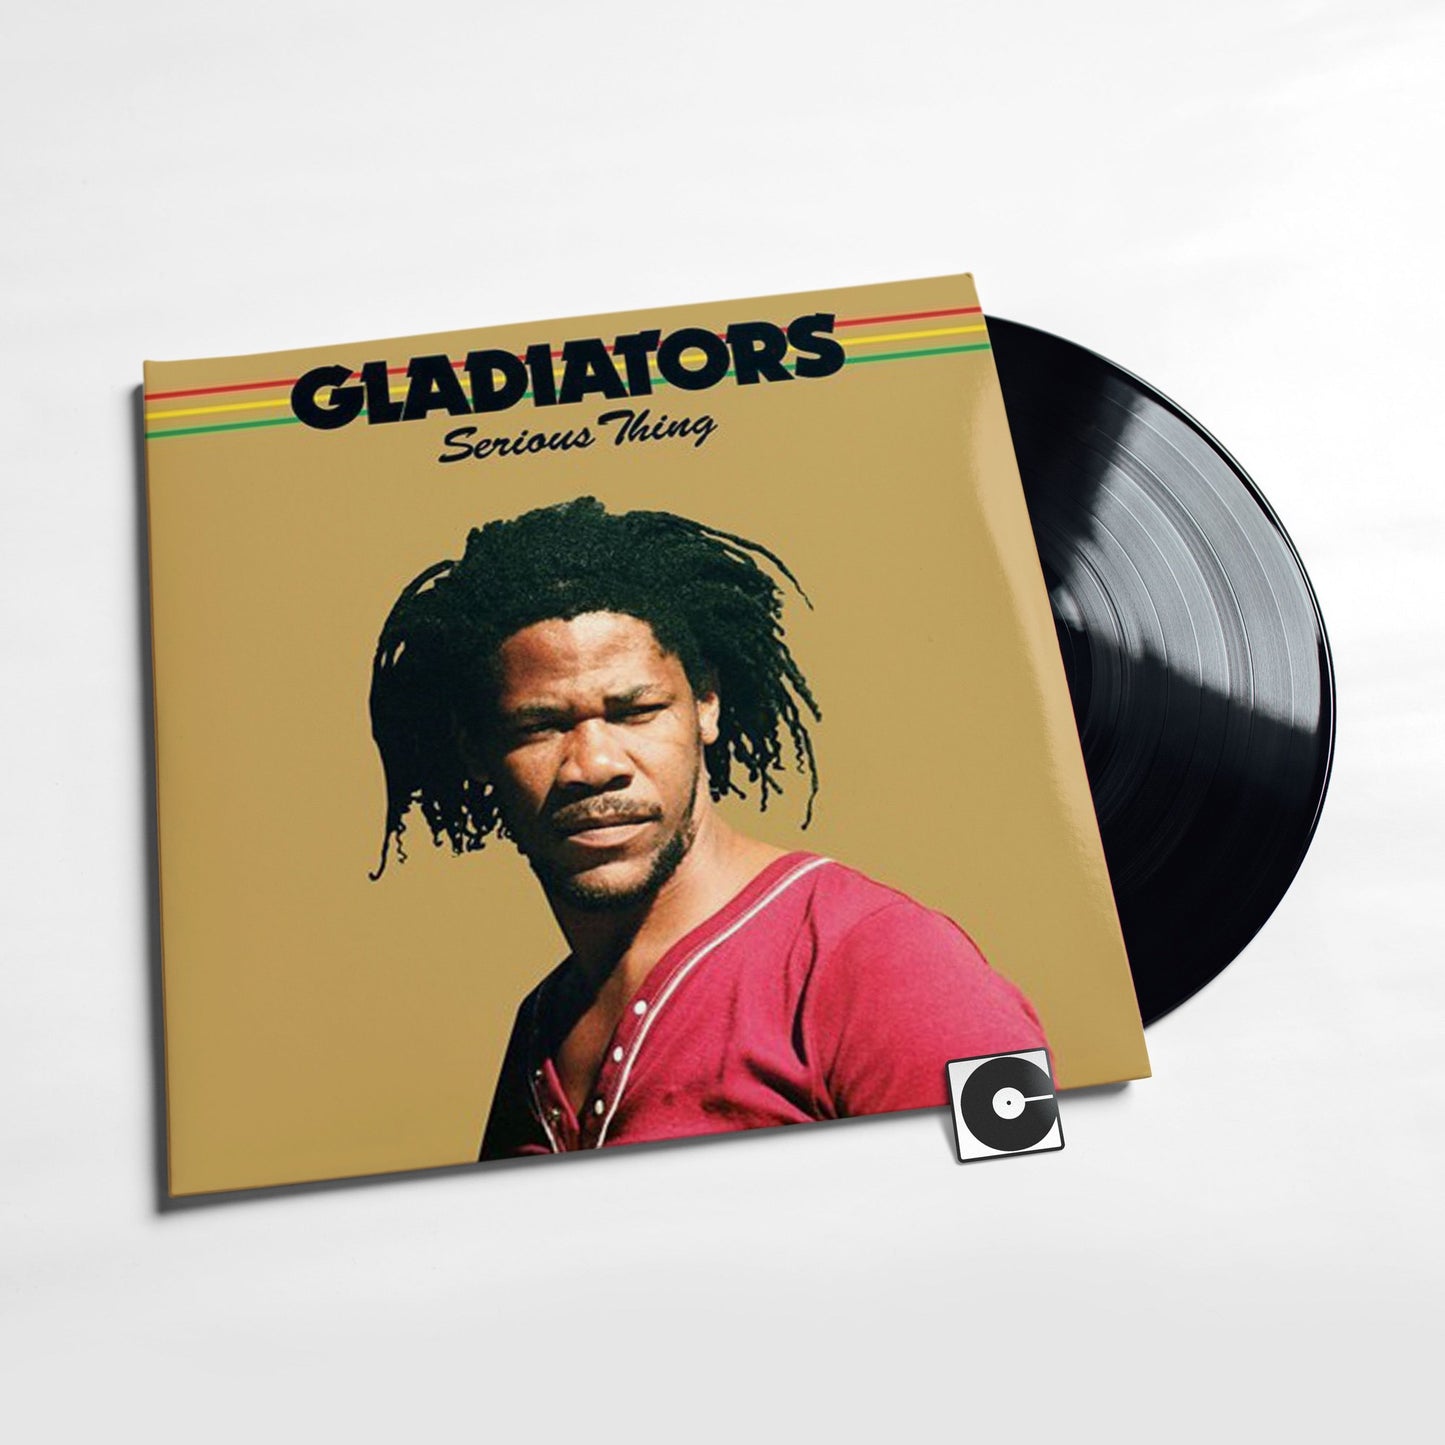 The Gladiators - "Serious Thing"